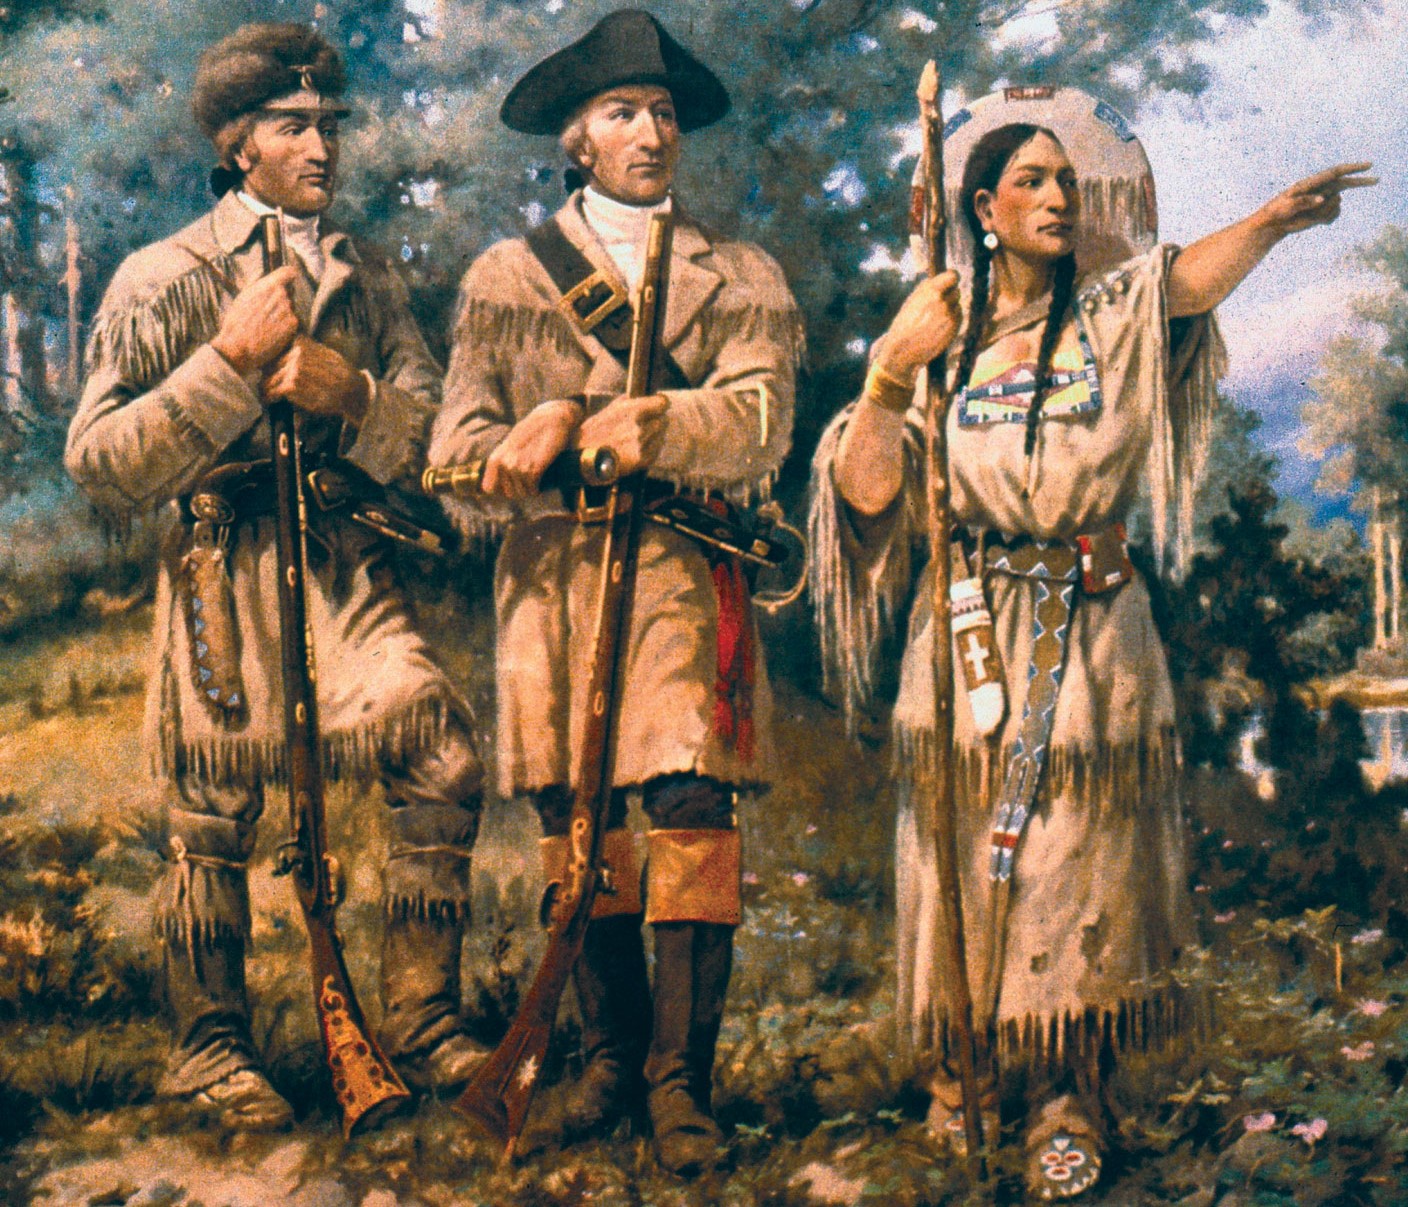 Sacagawea (right) with Lewis and Clark at the Three Forks, as depicted in a mural at the Montana House of Representatives.